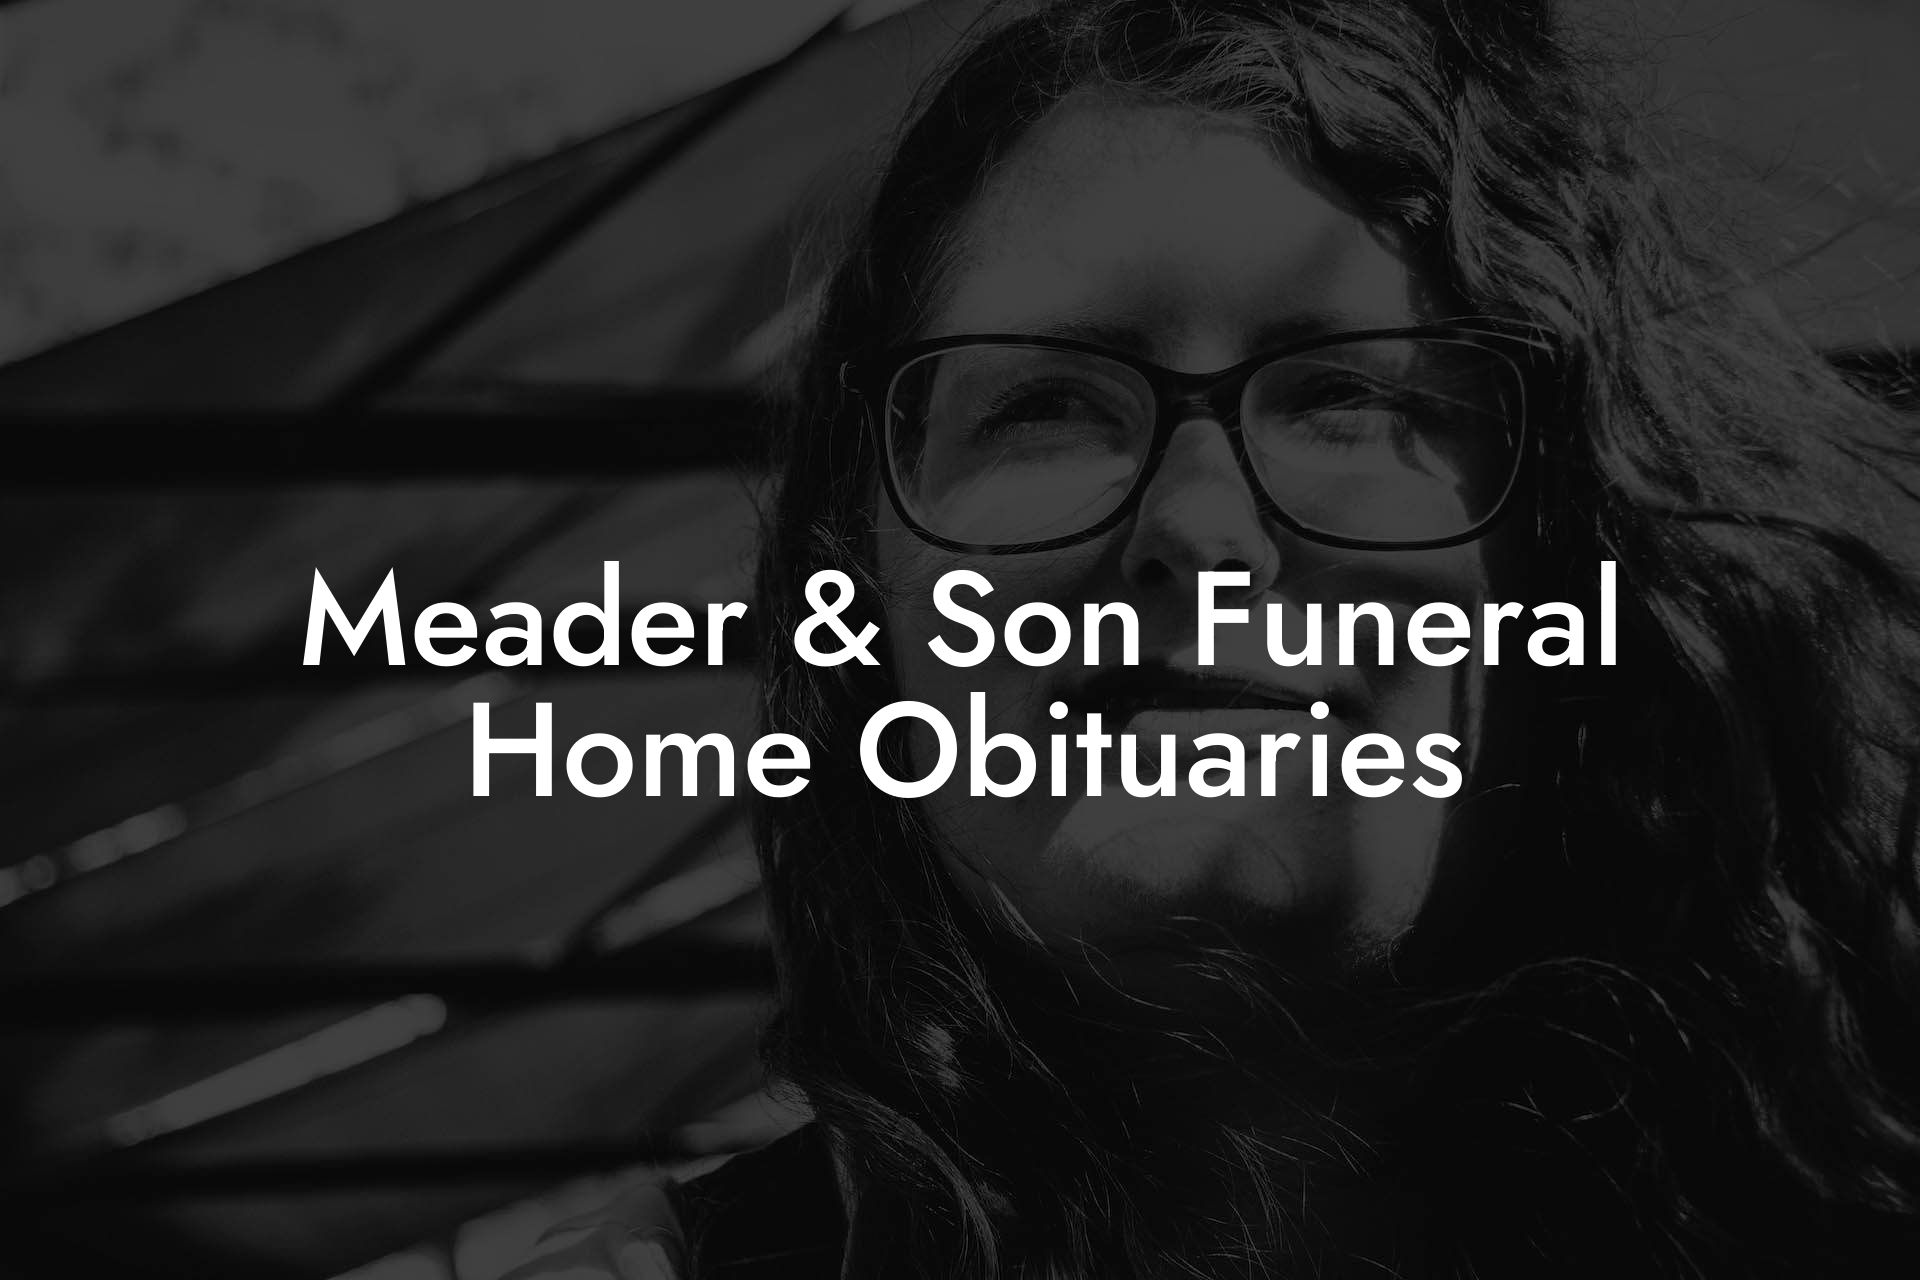 Meader & Son Funeral Home Obituaries